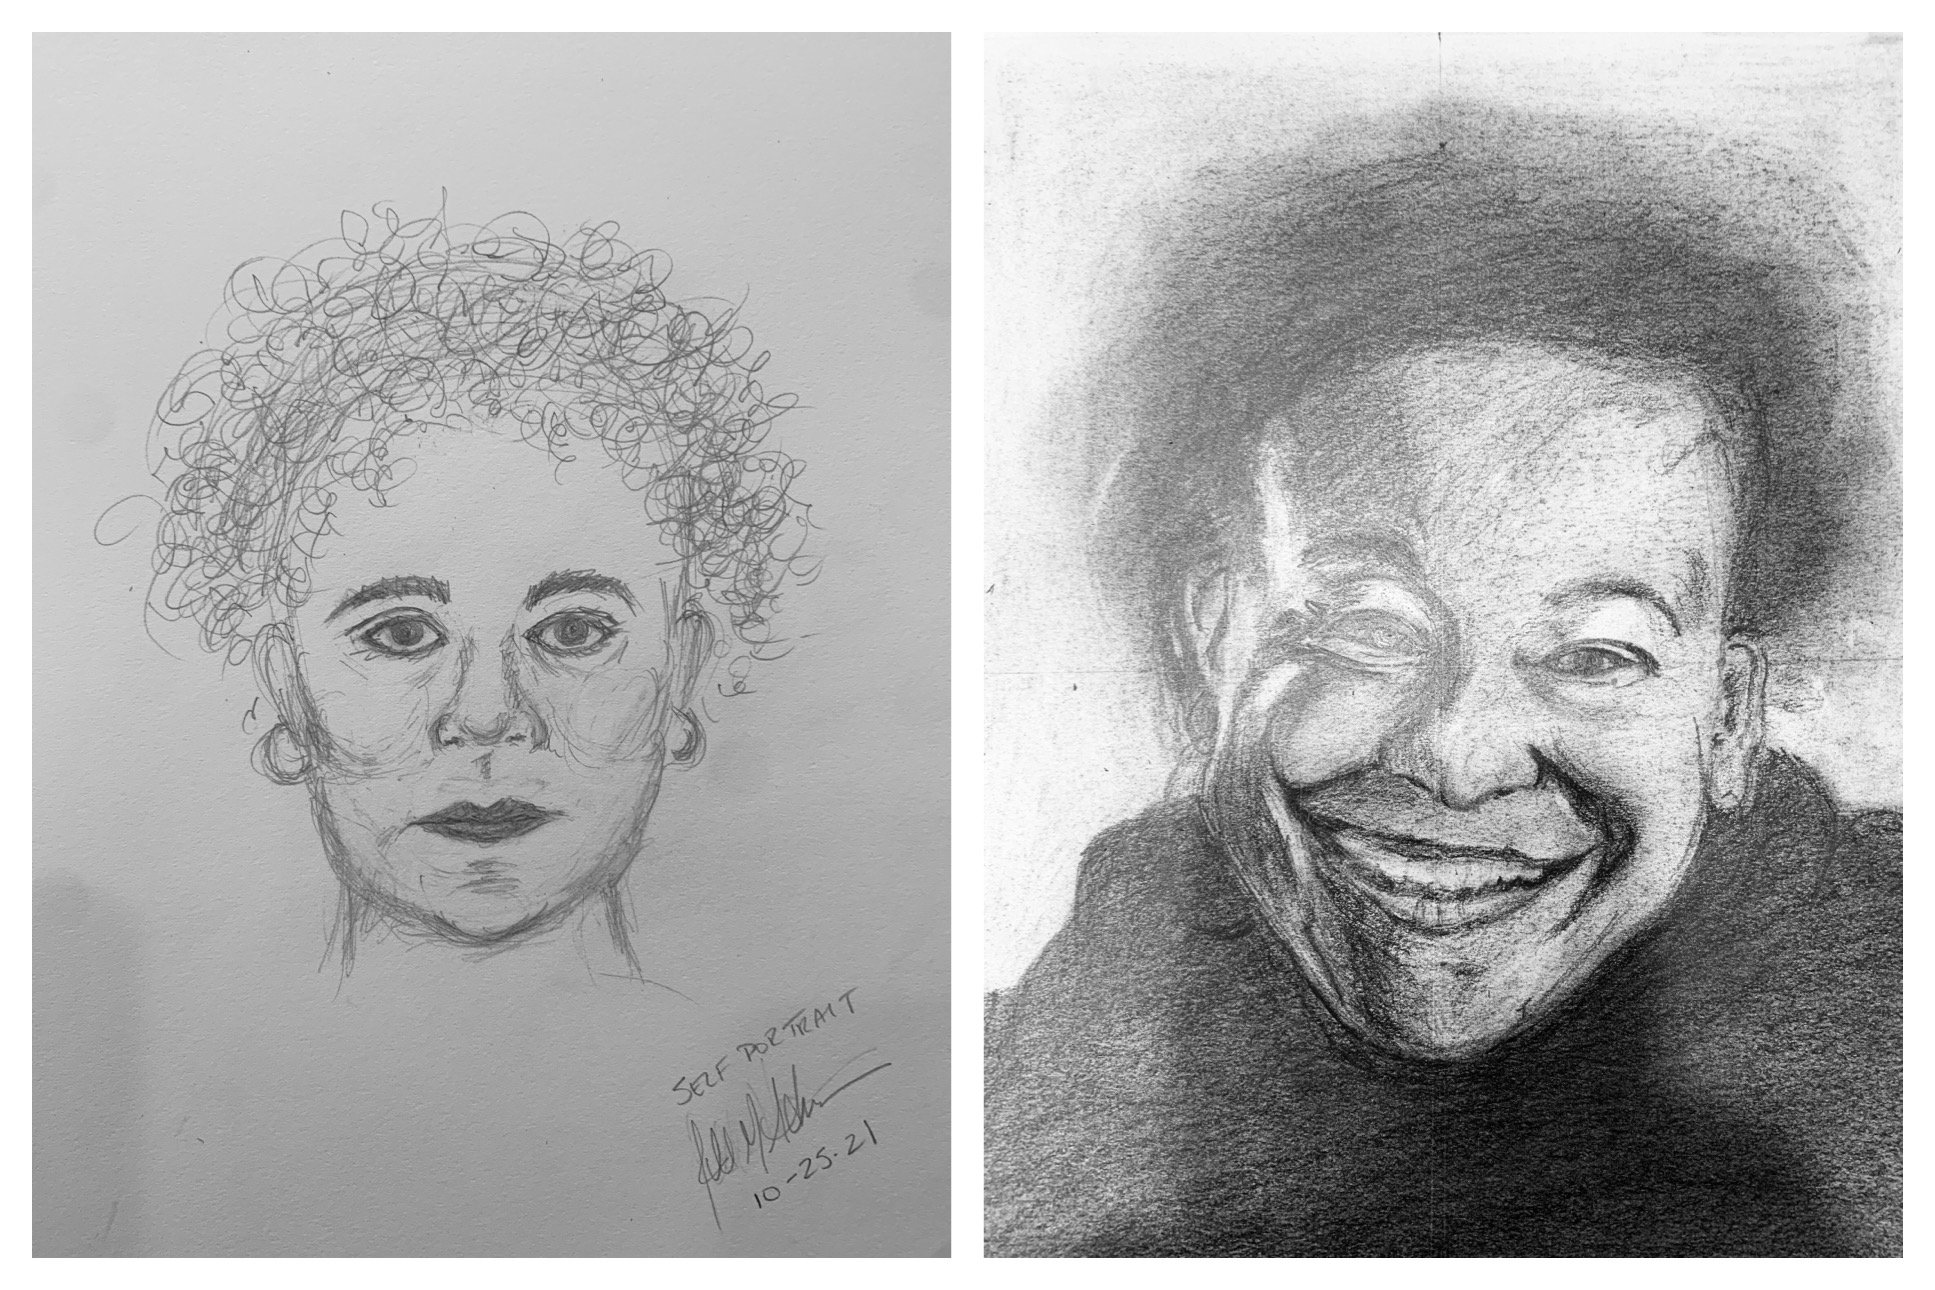 Jill's Before and After Self-Portraits